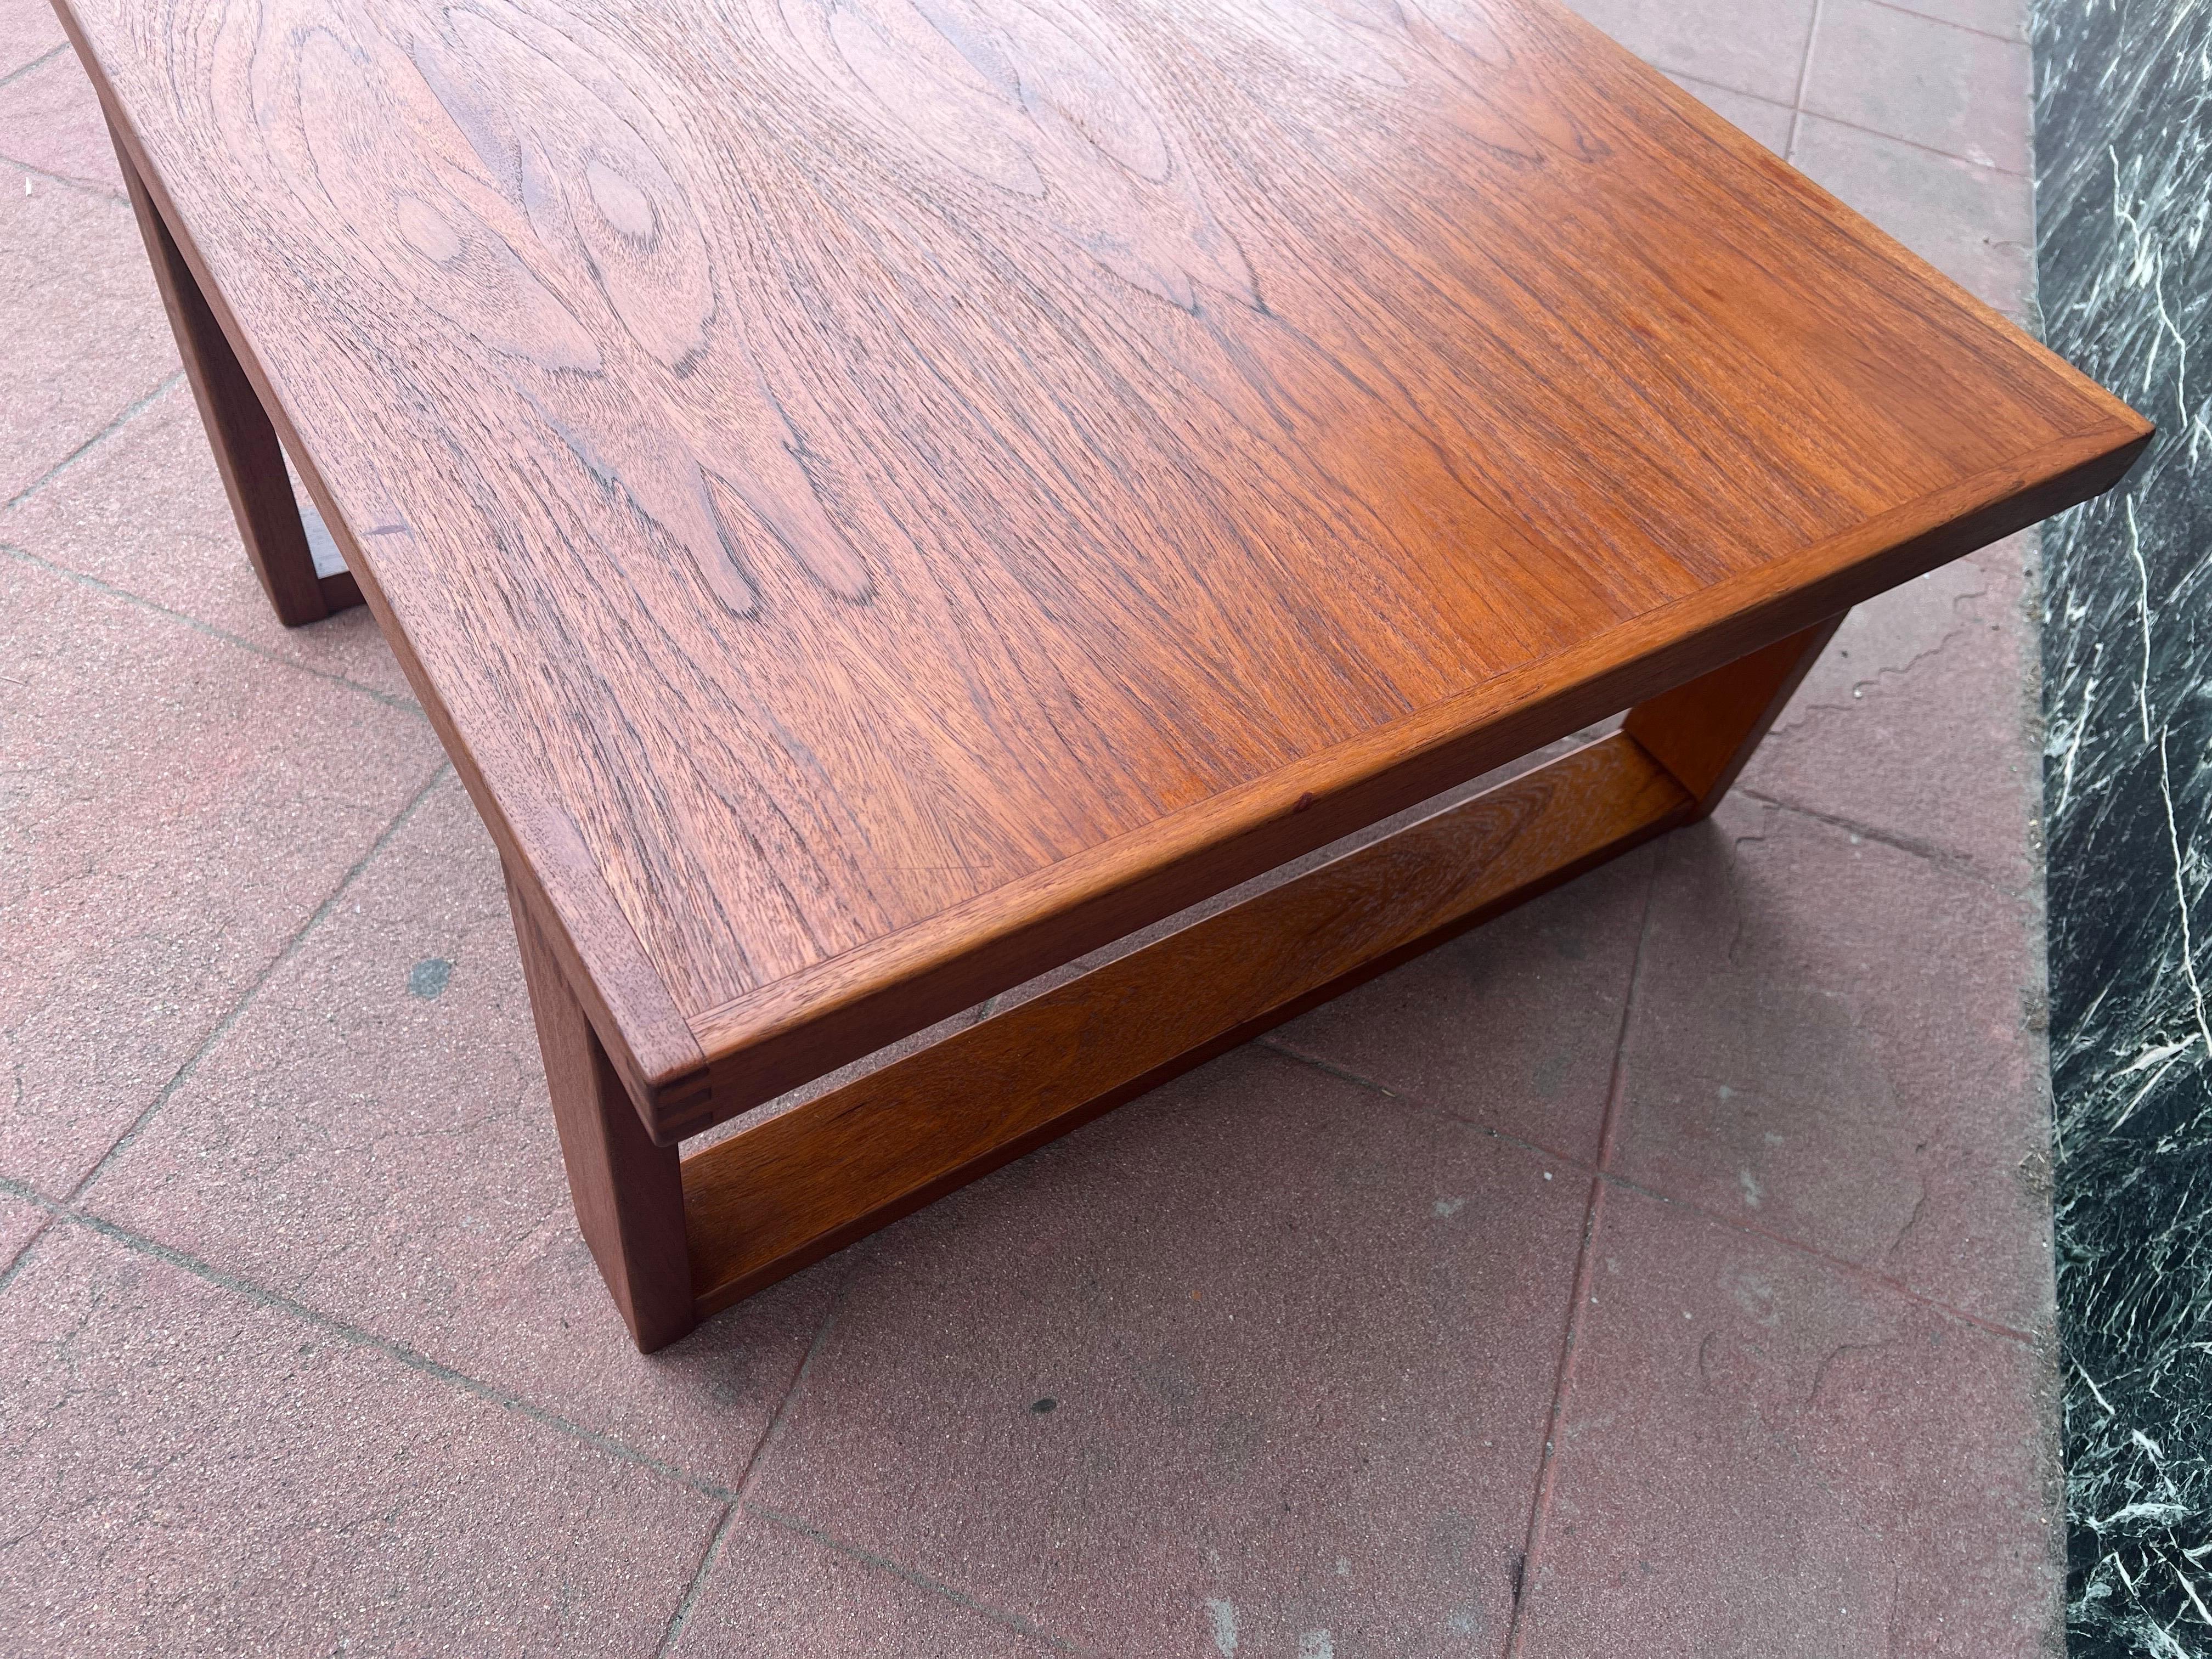 Danish Modern Teak Square Coffee Table by Trioh In Excellent Condition For Sale In San Diego, CA